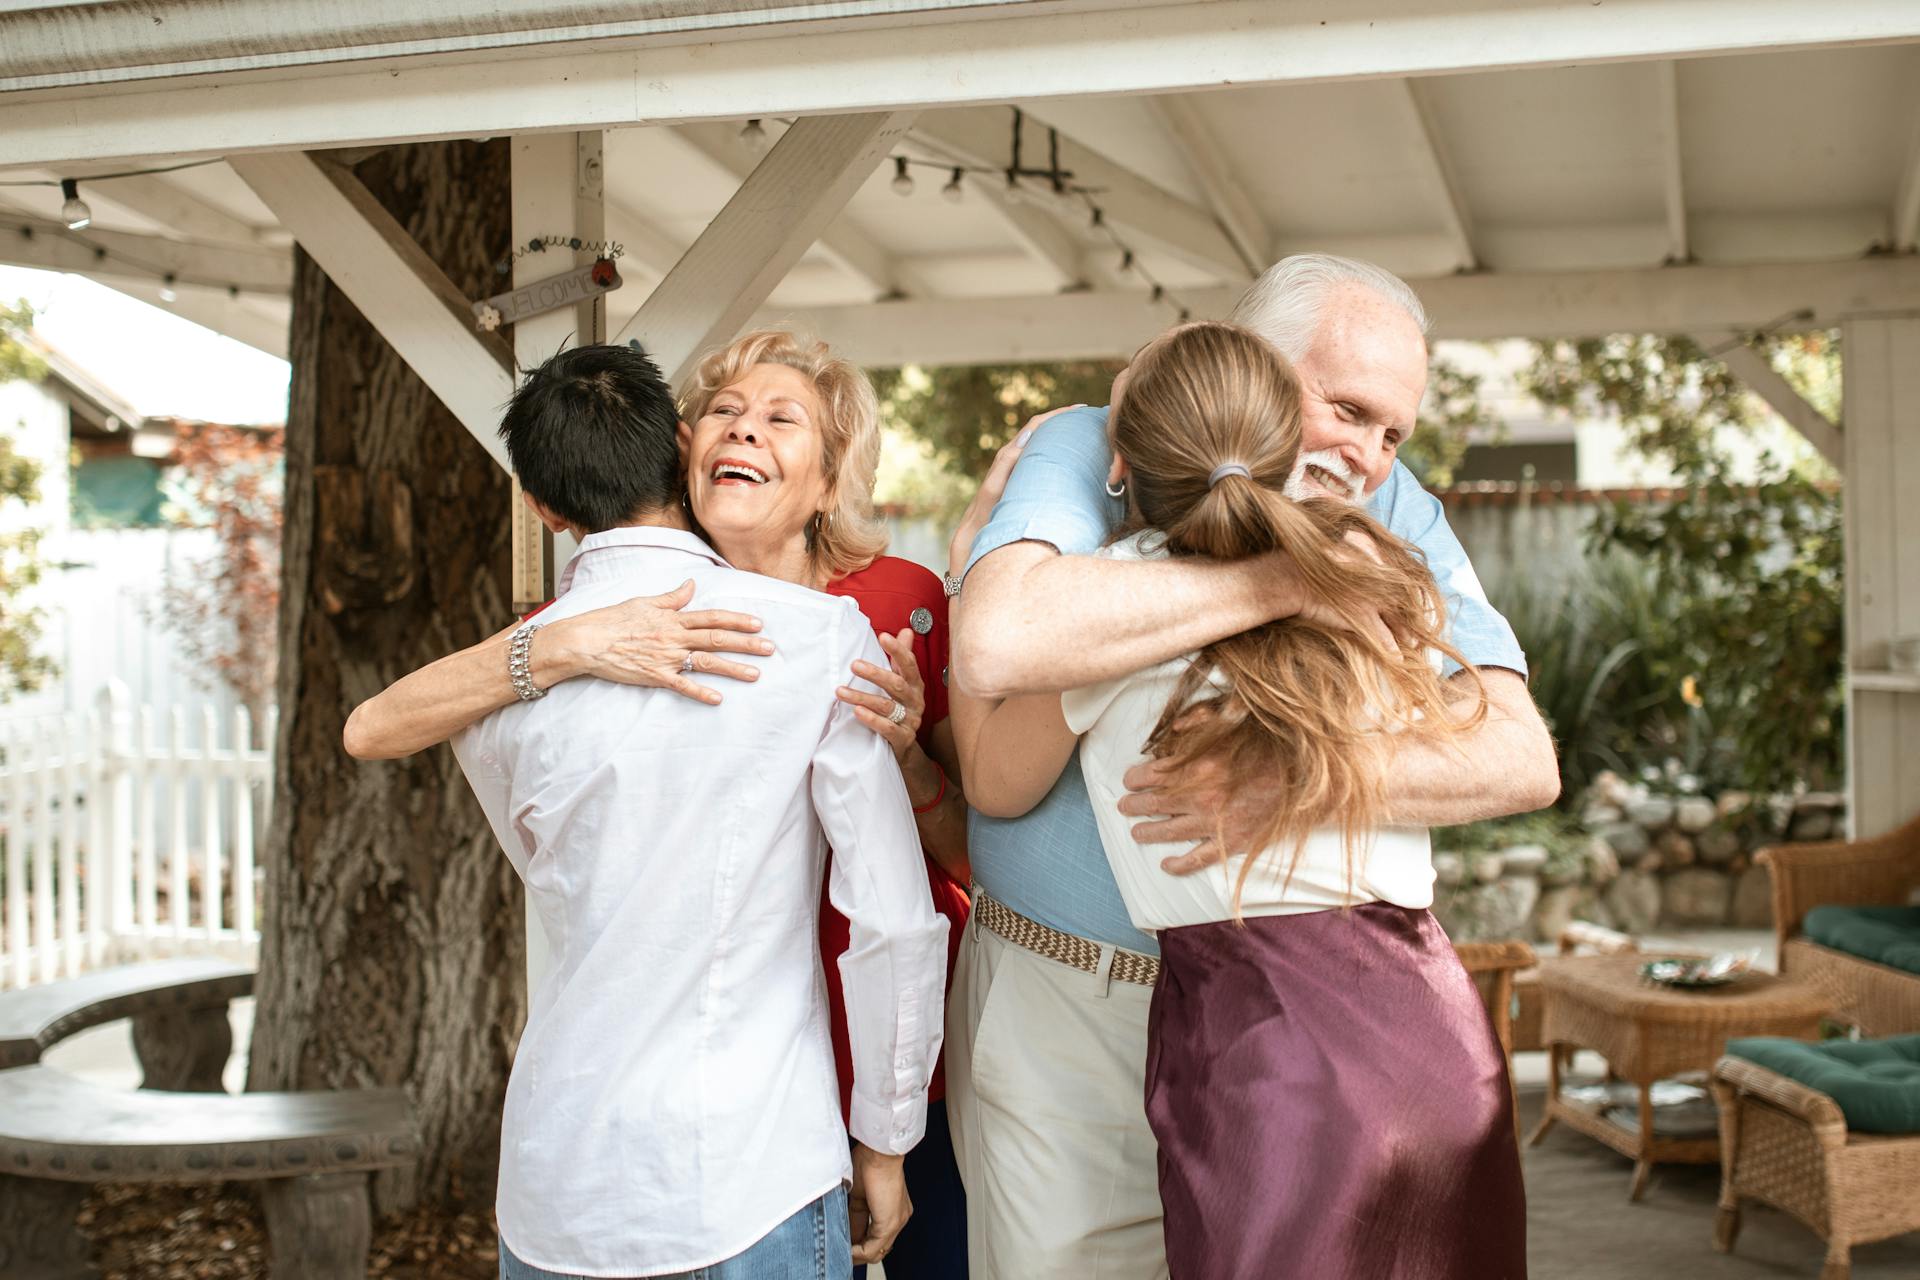 An elderly couple embracing a younger couple | Source: Pexels